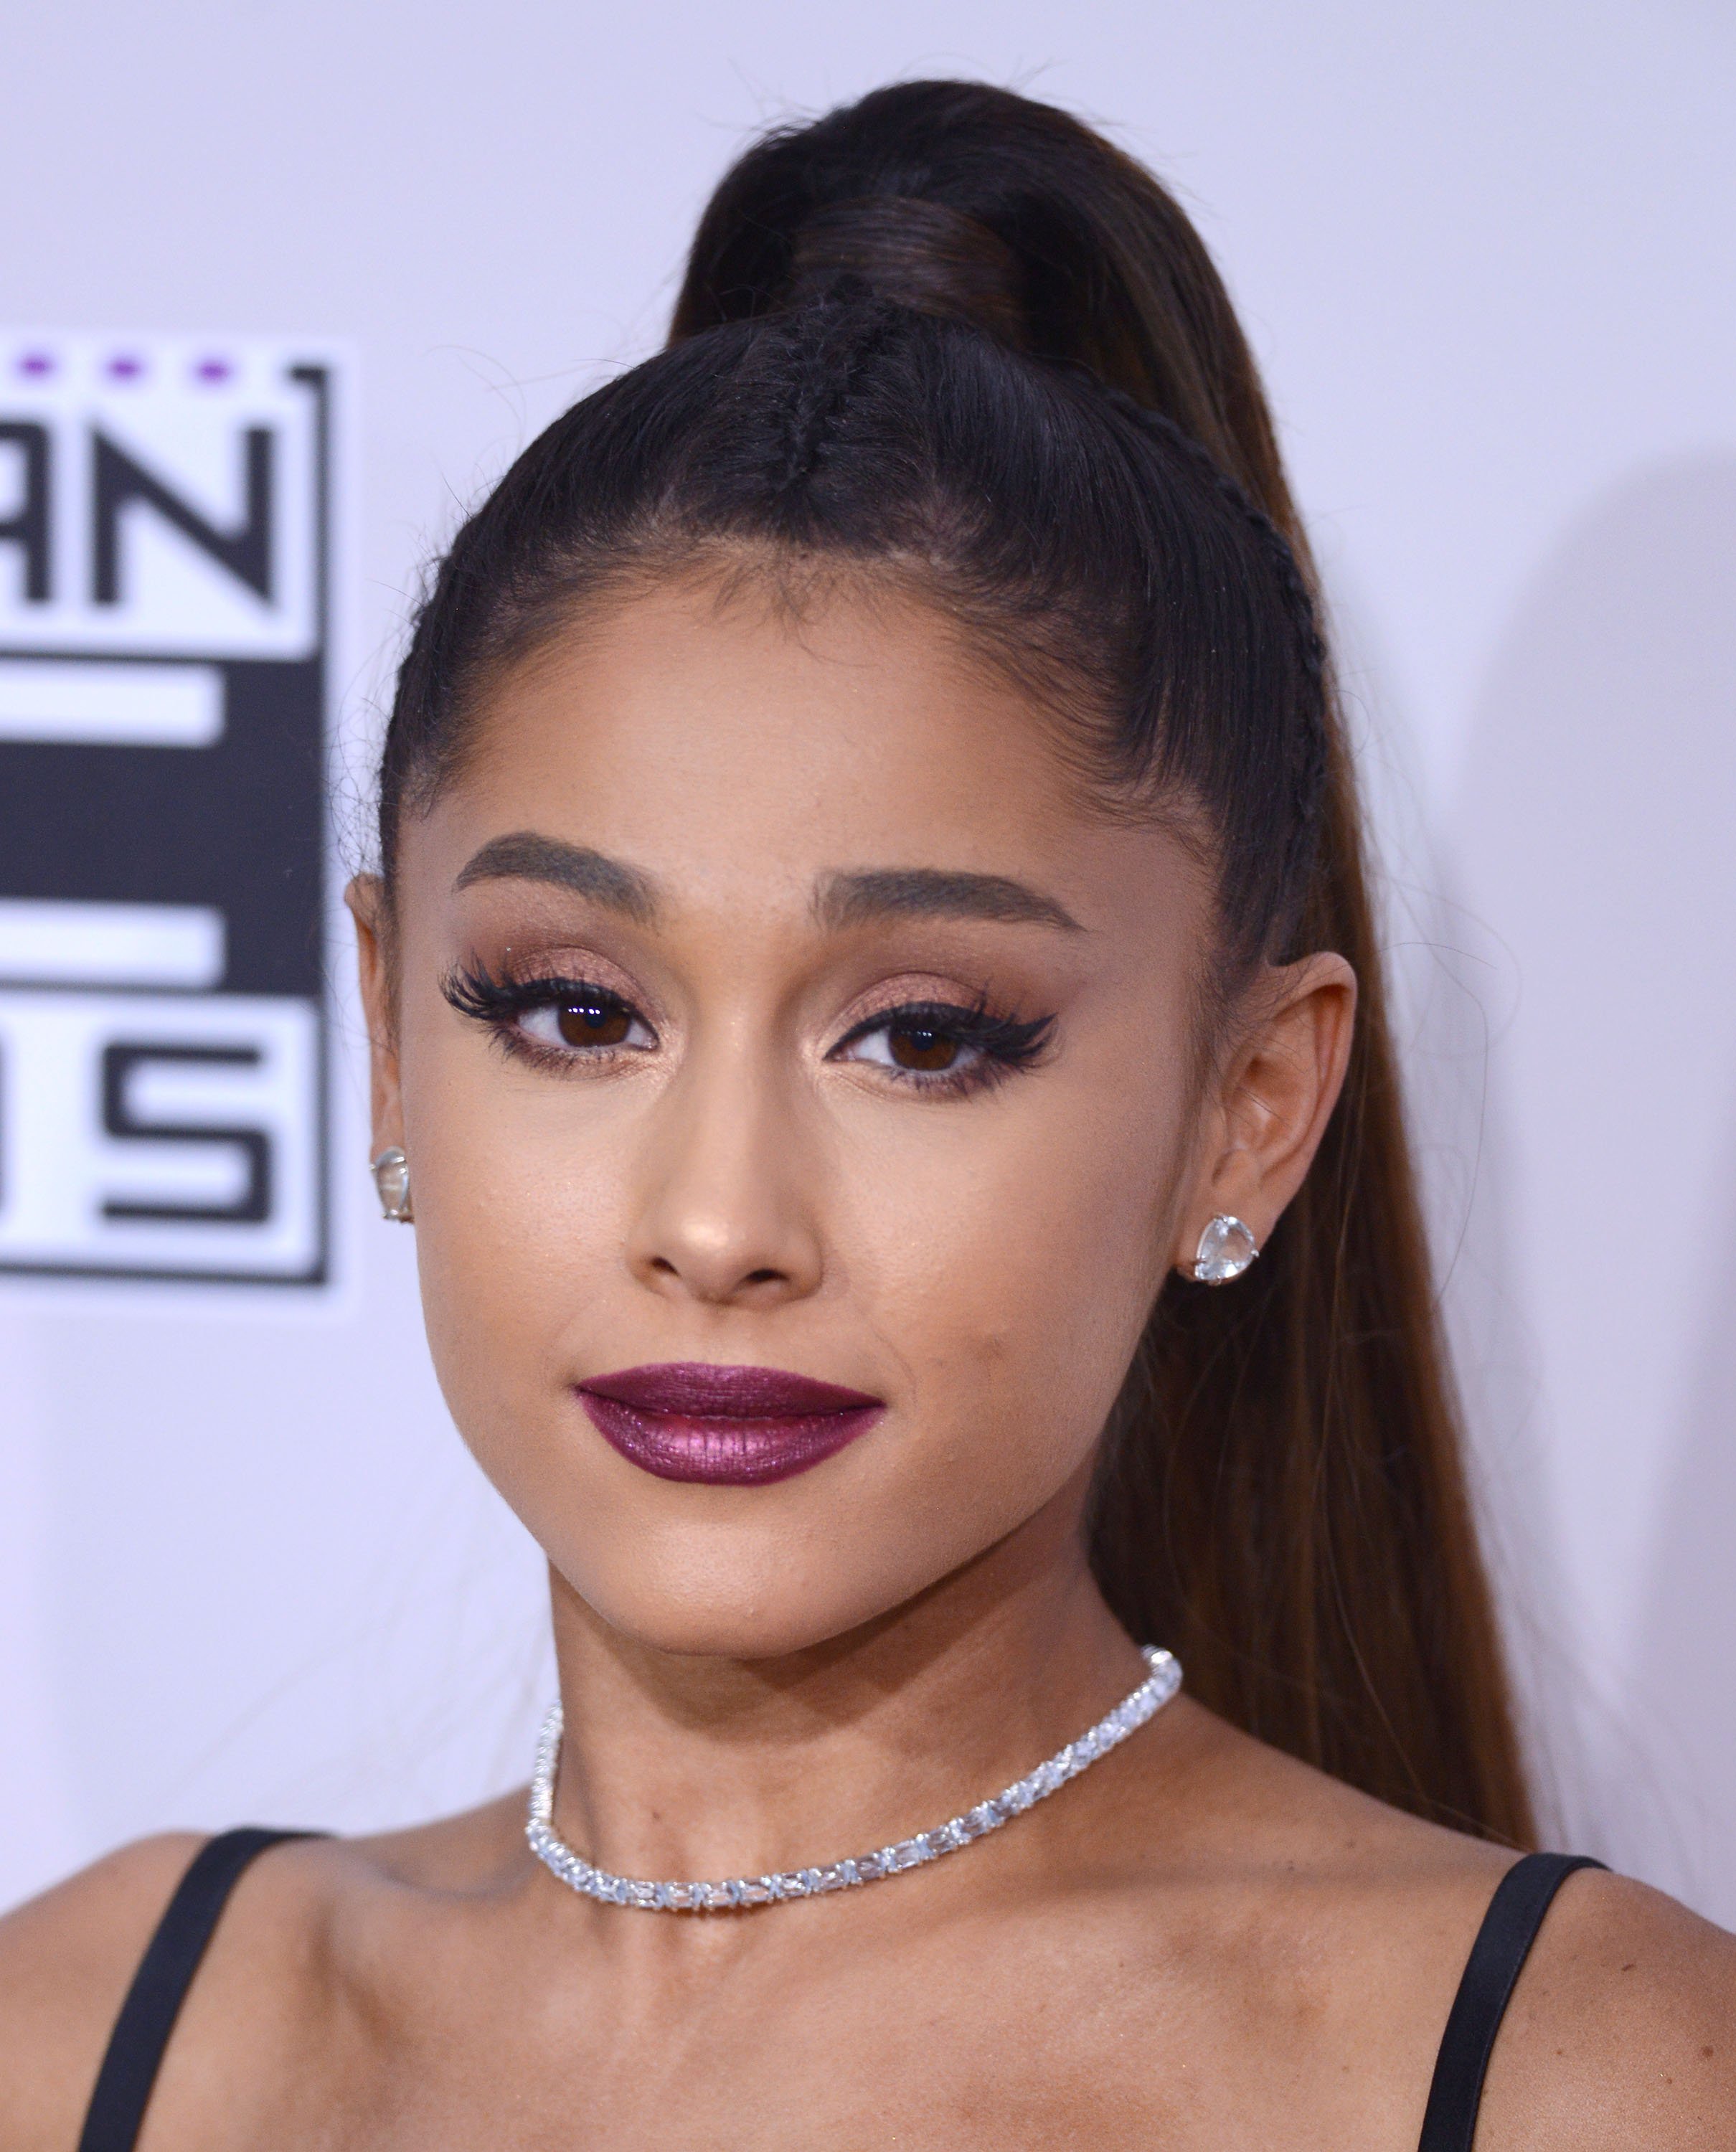 Then-23-year-old Ariana Grande arrived in Los Angeles, California, at the American Music Awards in Microsoft Theater on November 20, 2016. | Source: Getty Images